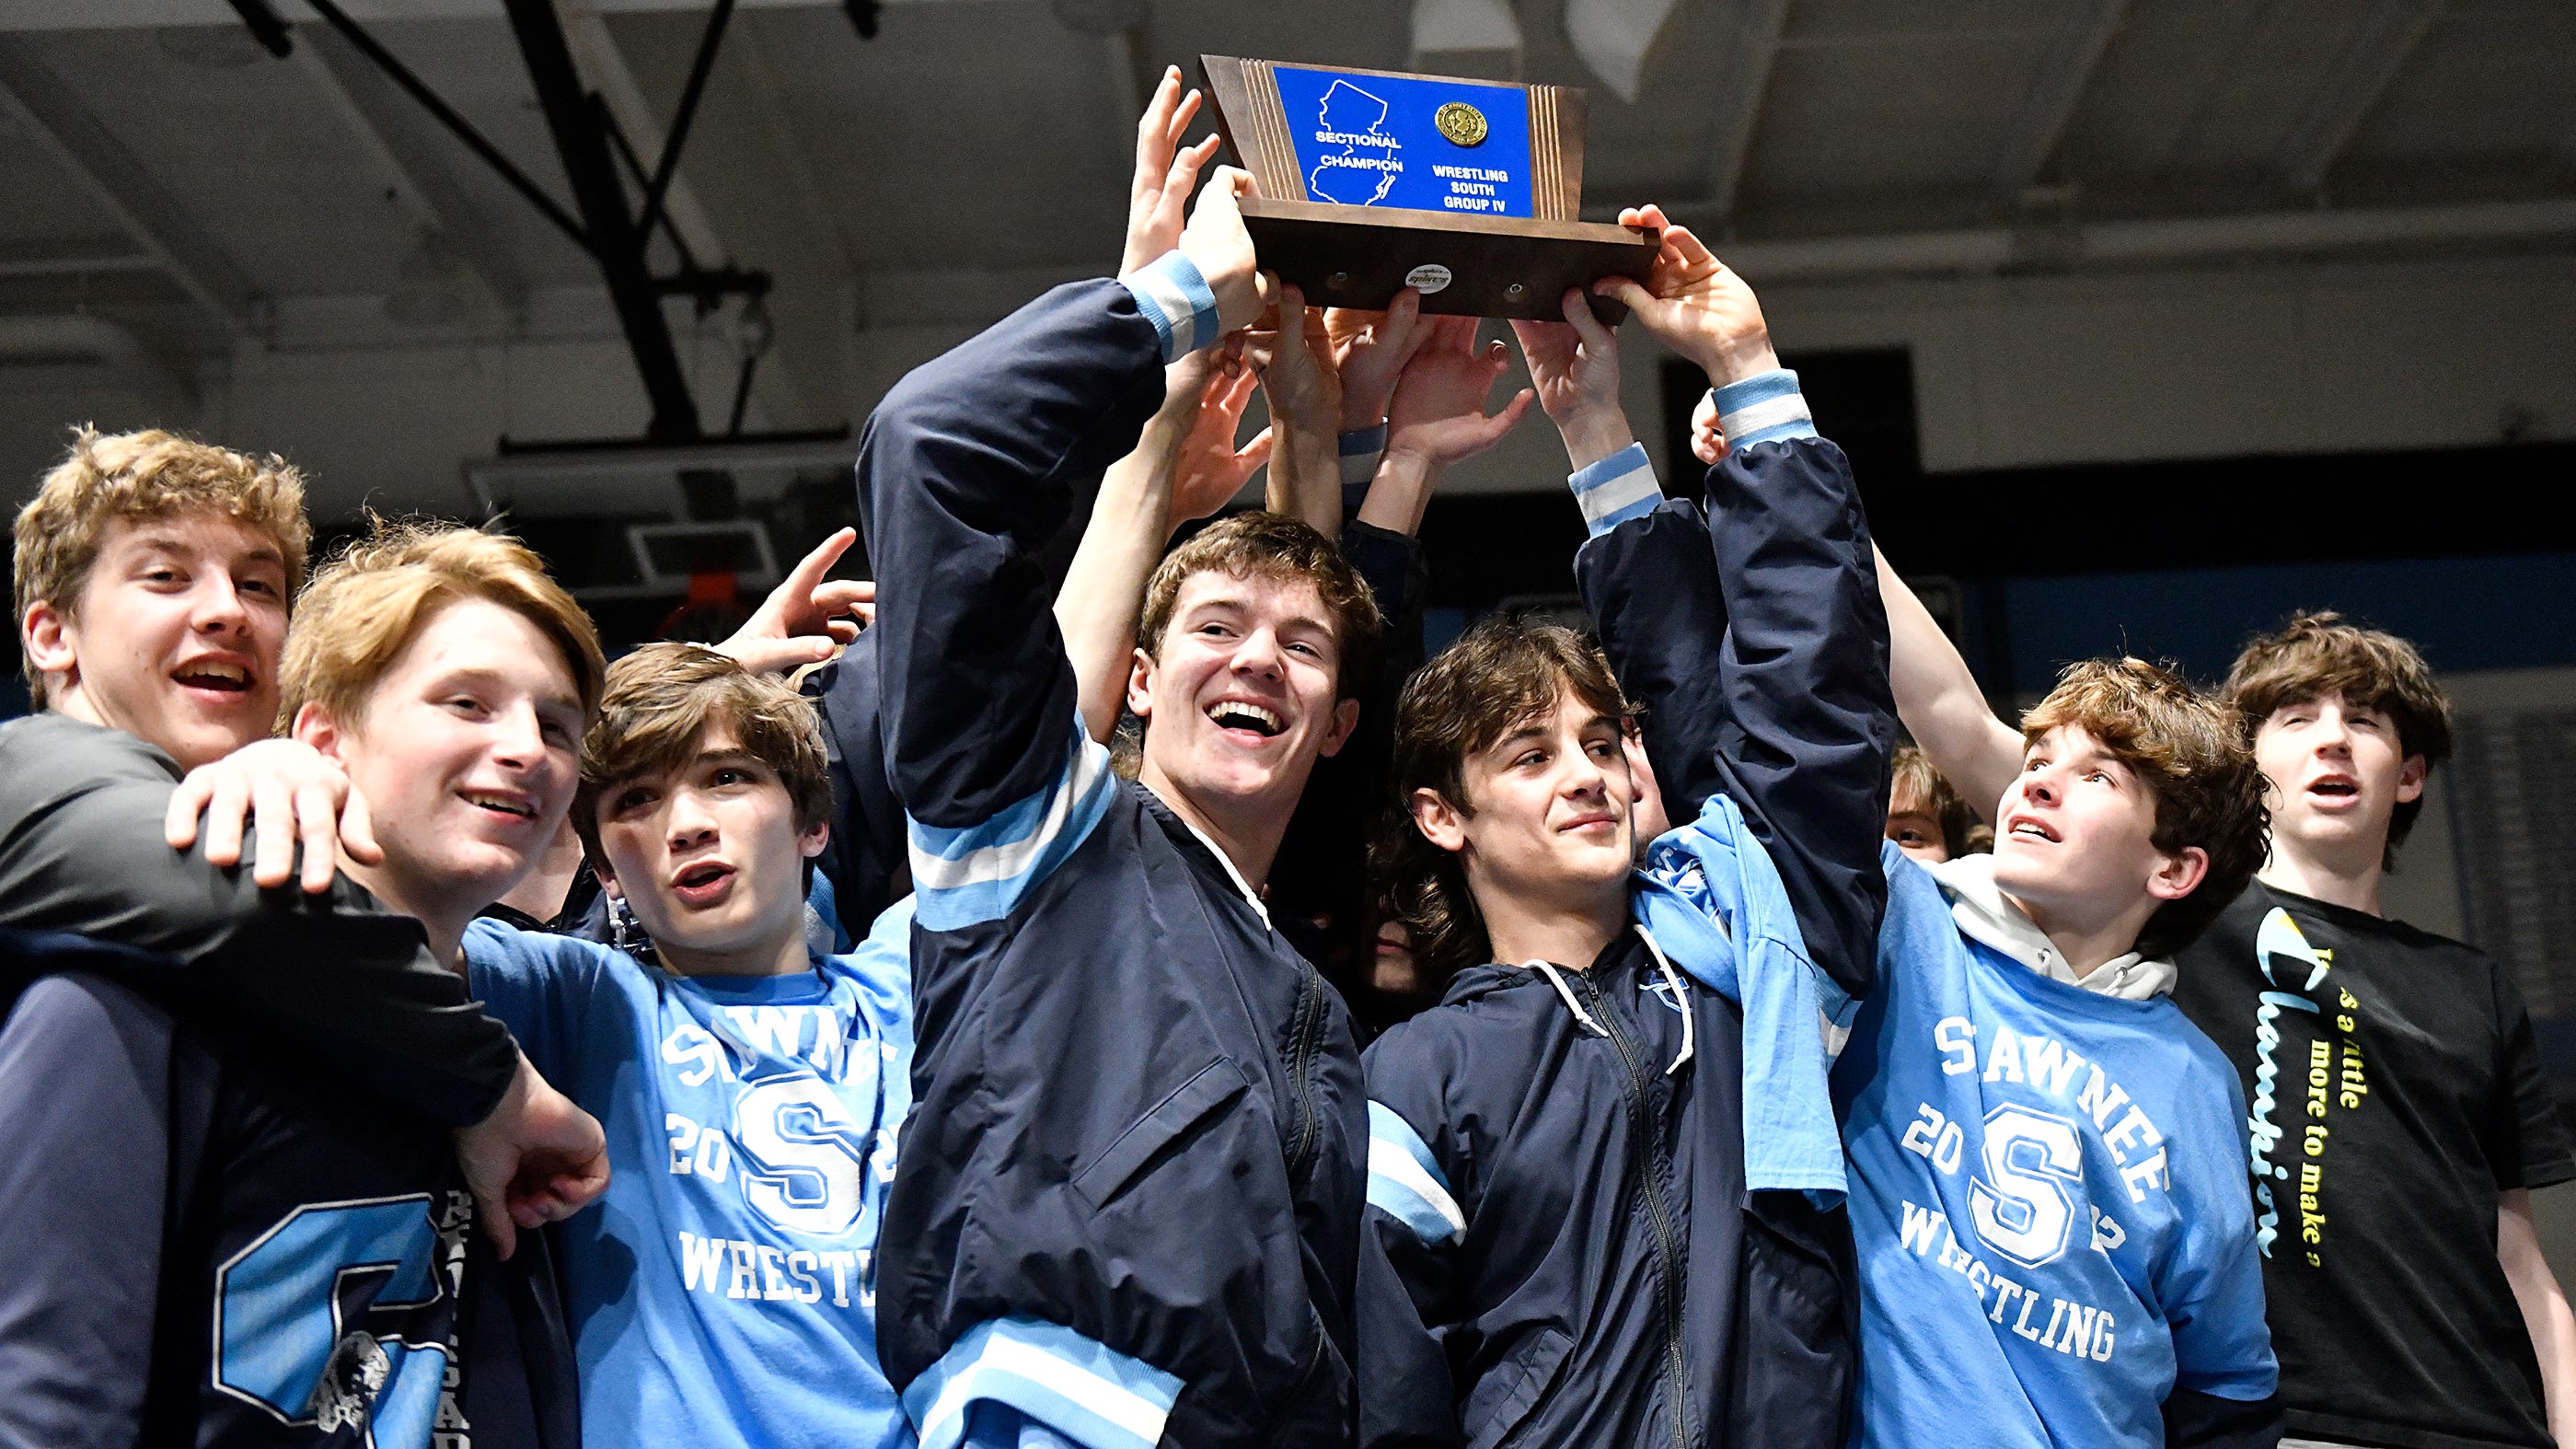 Shawnee wrestling beats Moorestown for first South Jersey championship